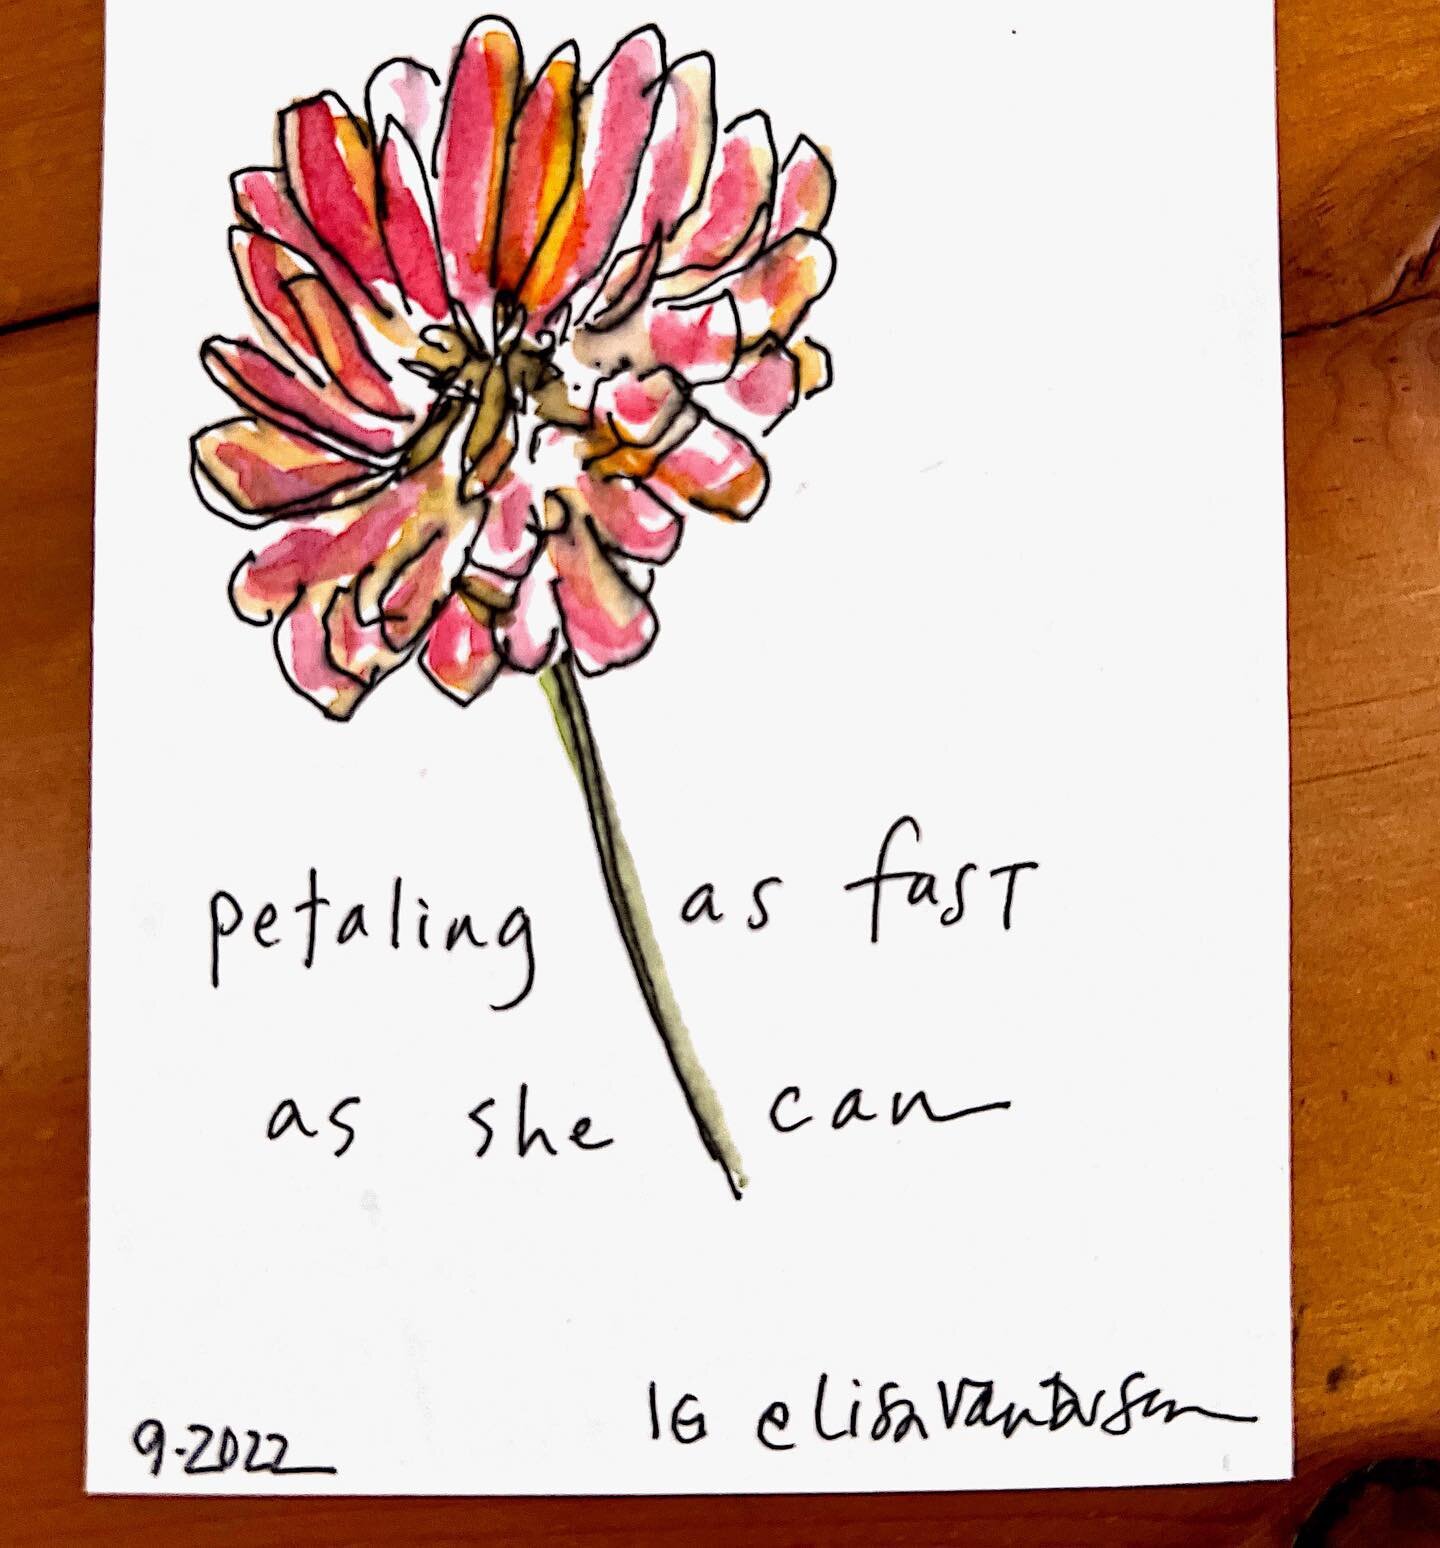 This &ldquo;came to me&rdquo; as I was drawing a particularly petal-ful state fair #zinnia from our garden. And it was perfect for my friend Alison Cormack who indeed in one of the fastest petalers and pedalers I know! 
.
.
.
#zinnia #petals #friends